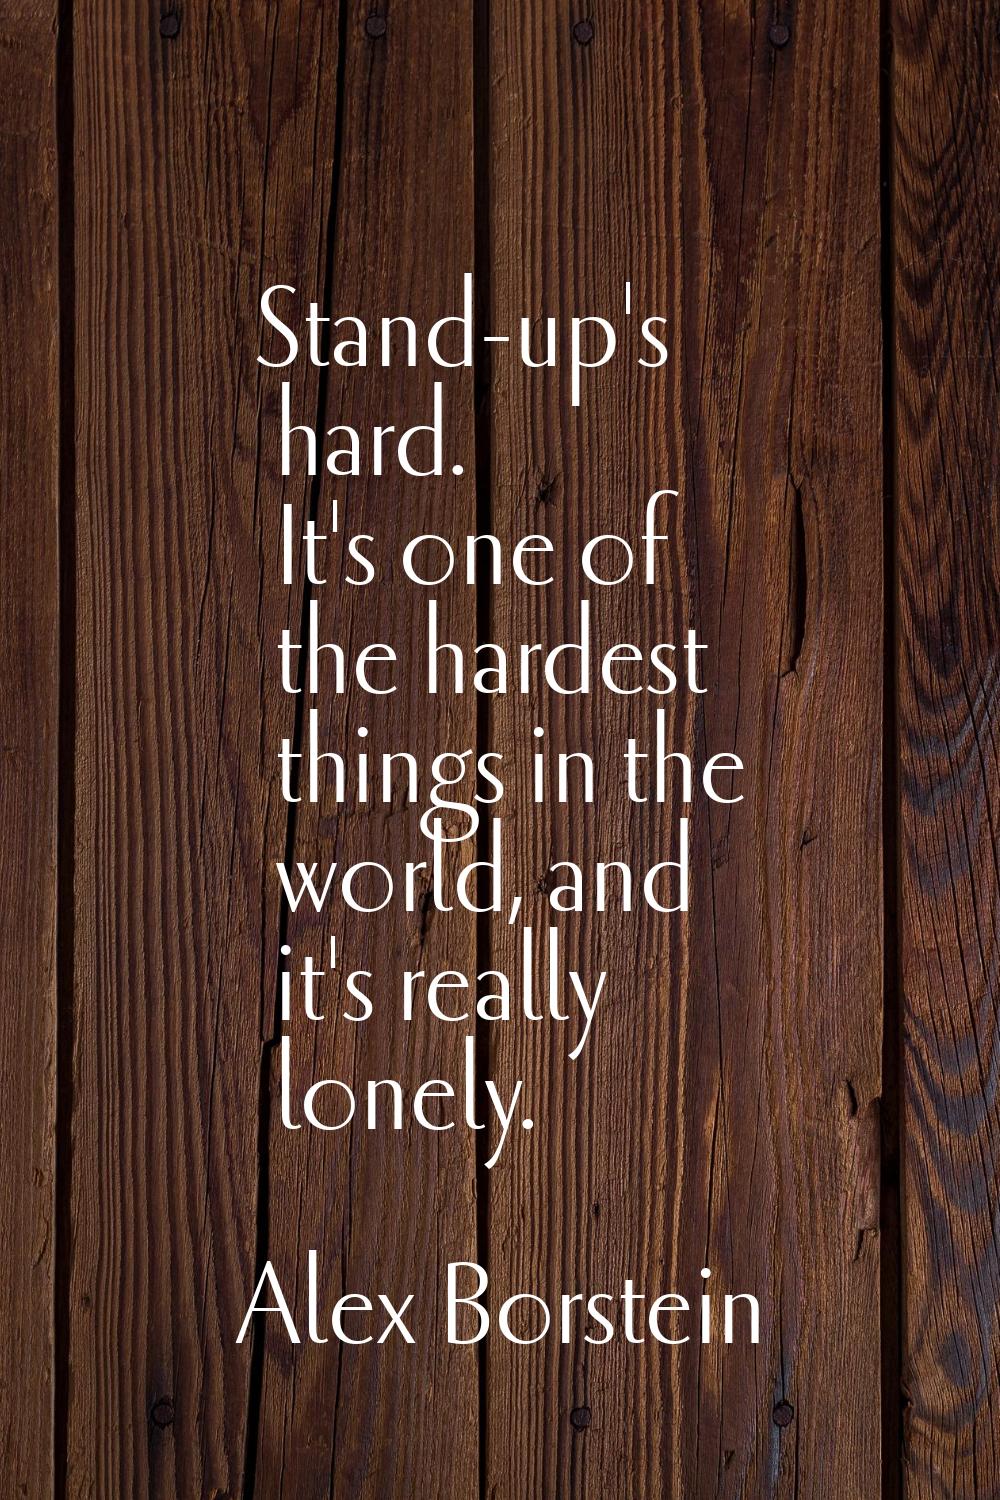 Stand-up's hard. It's one of the hardest things in the world, and it's really lonely.